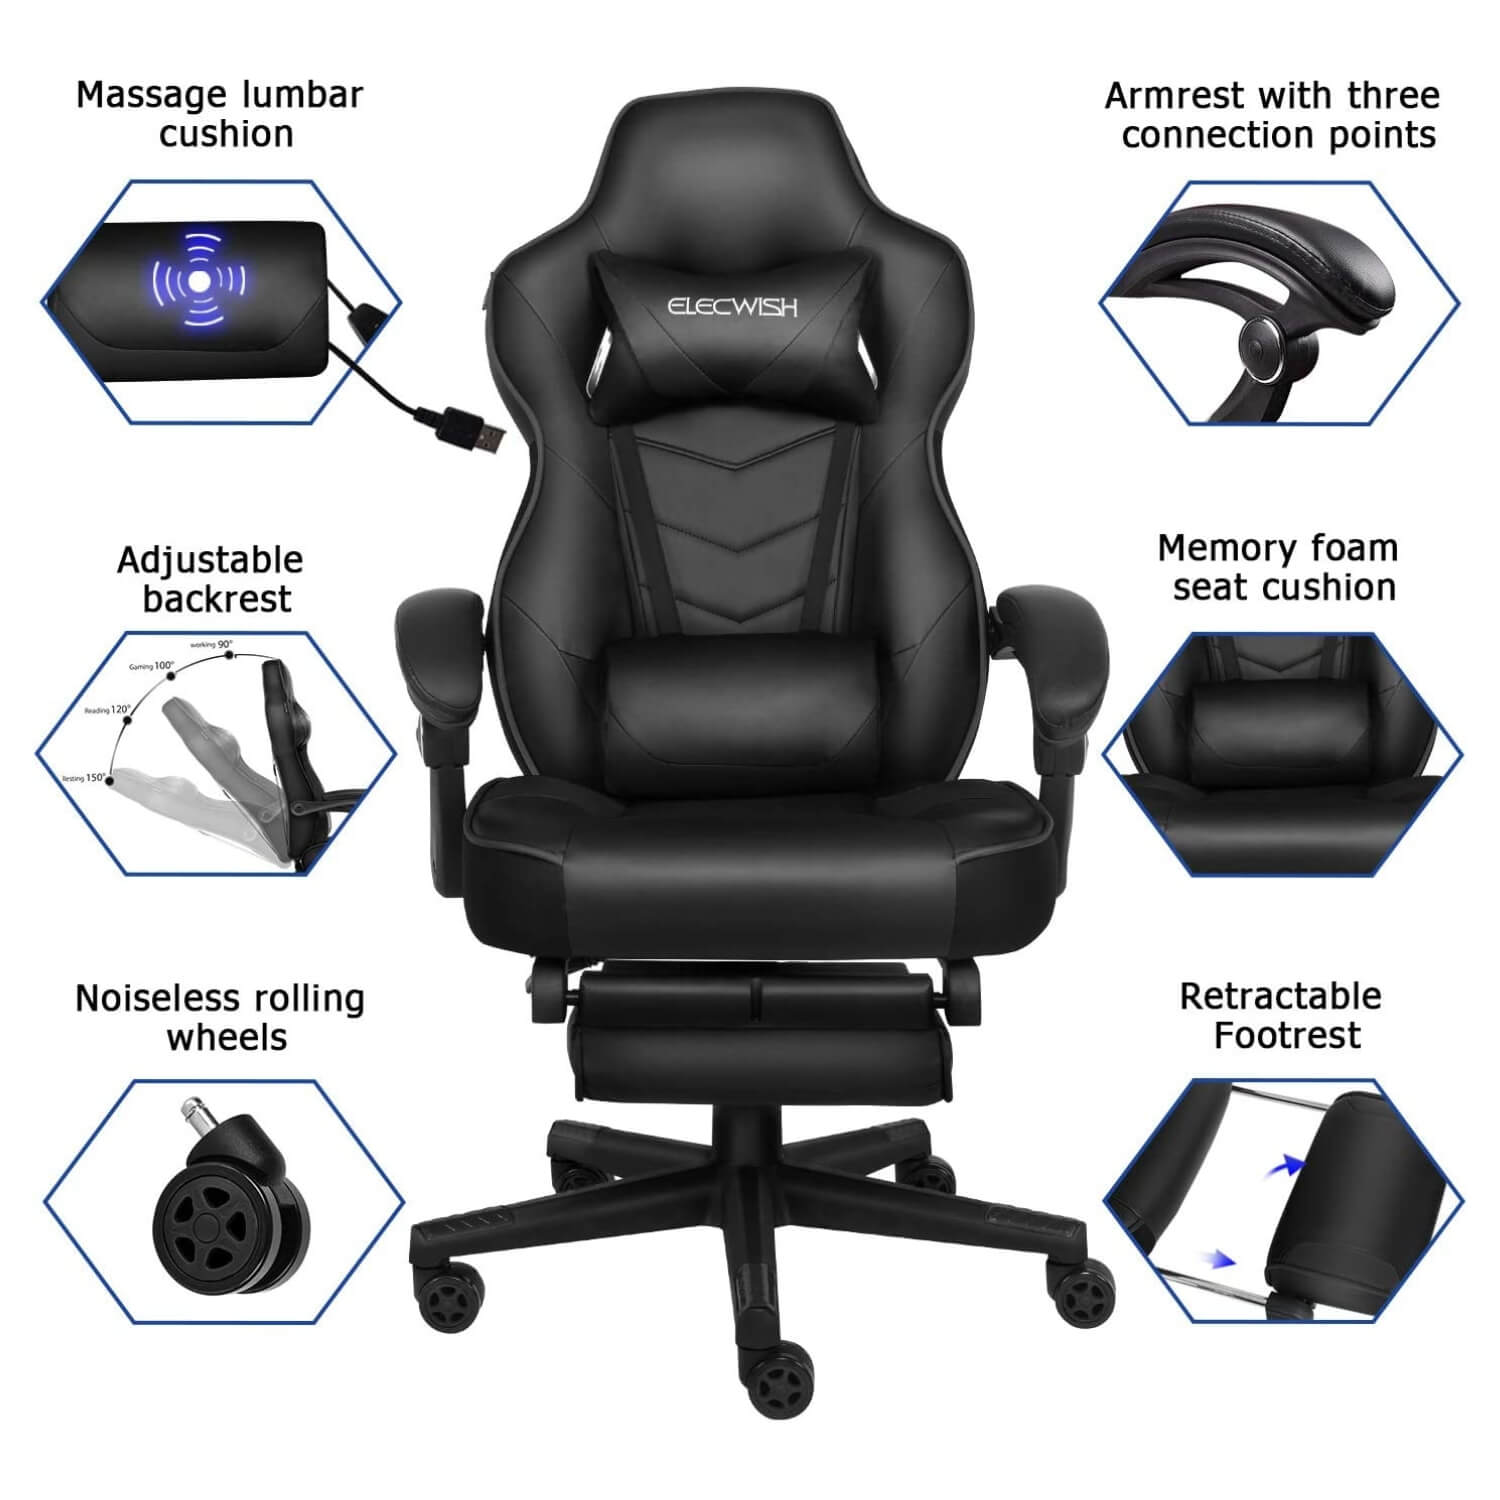 Six features of Elecwish black massage gaming chair with footrest OC112